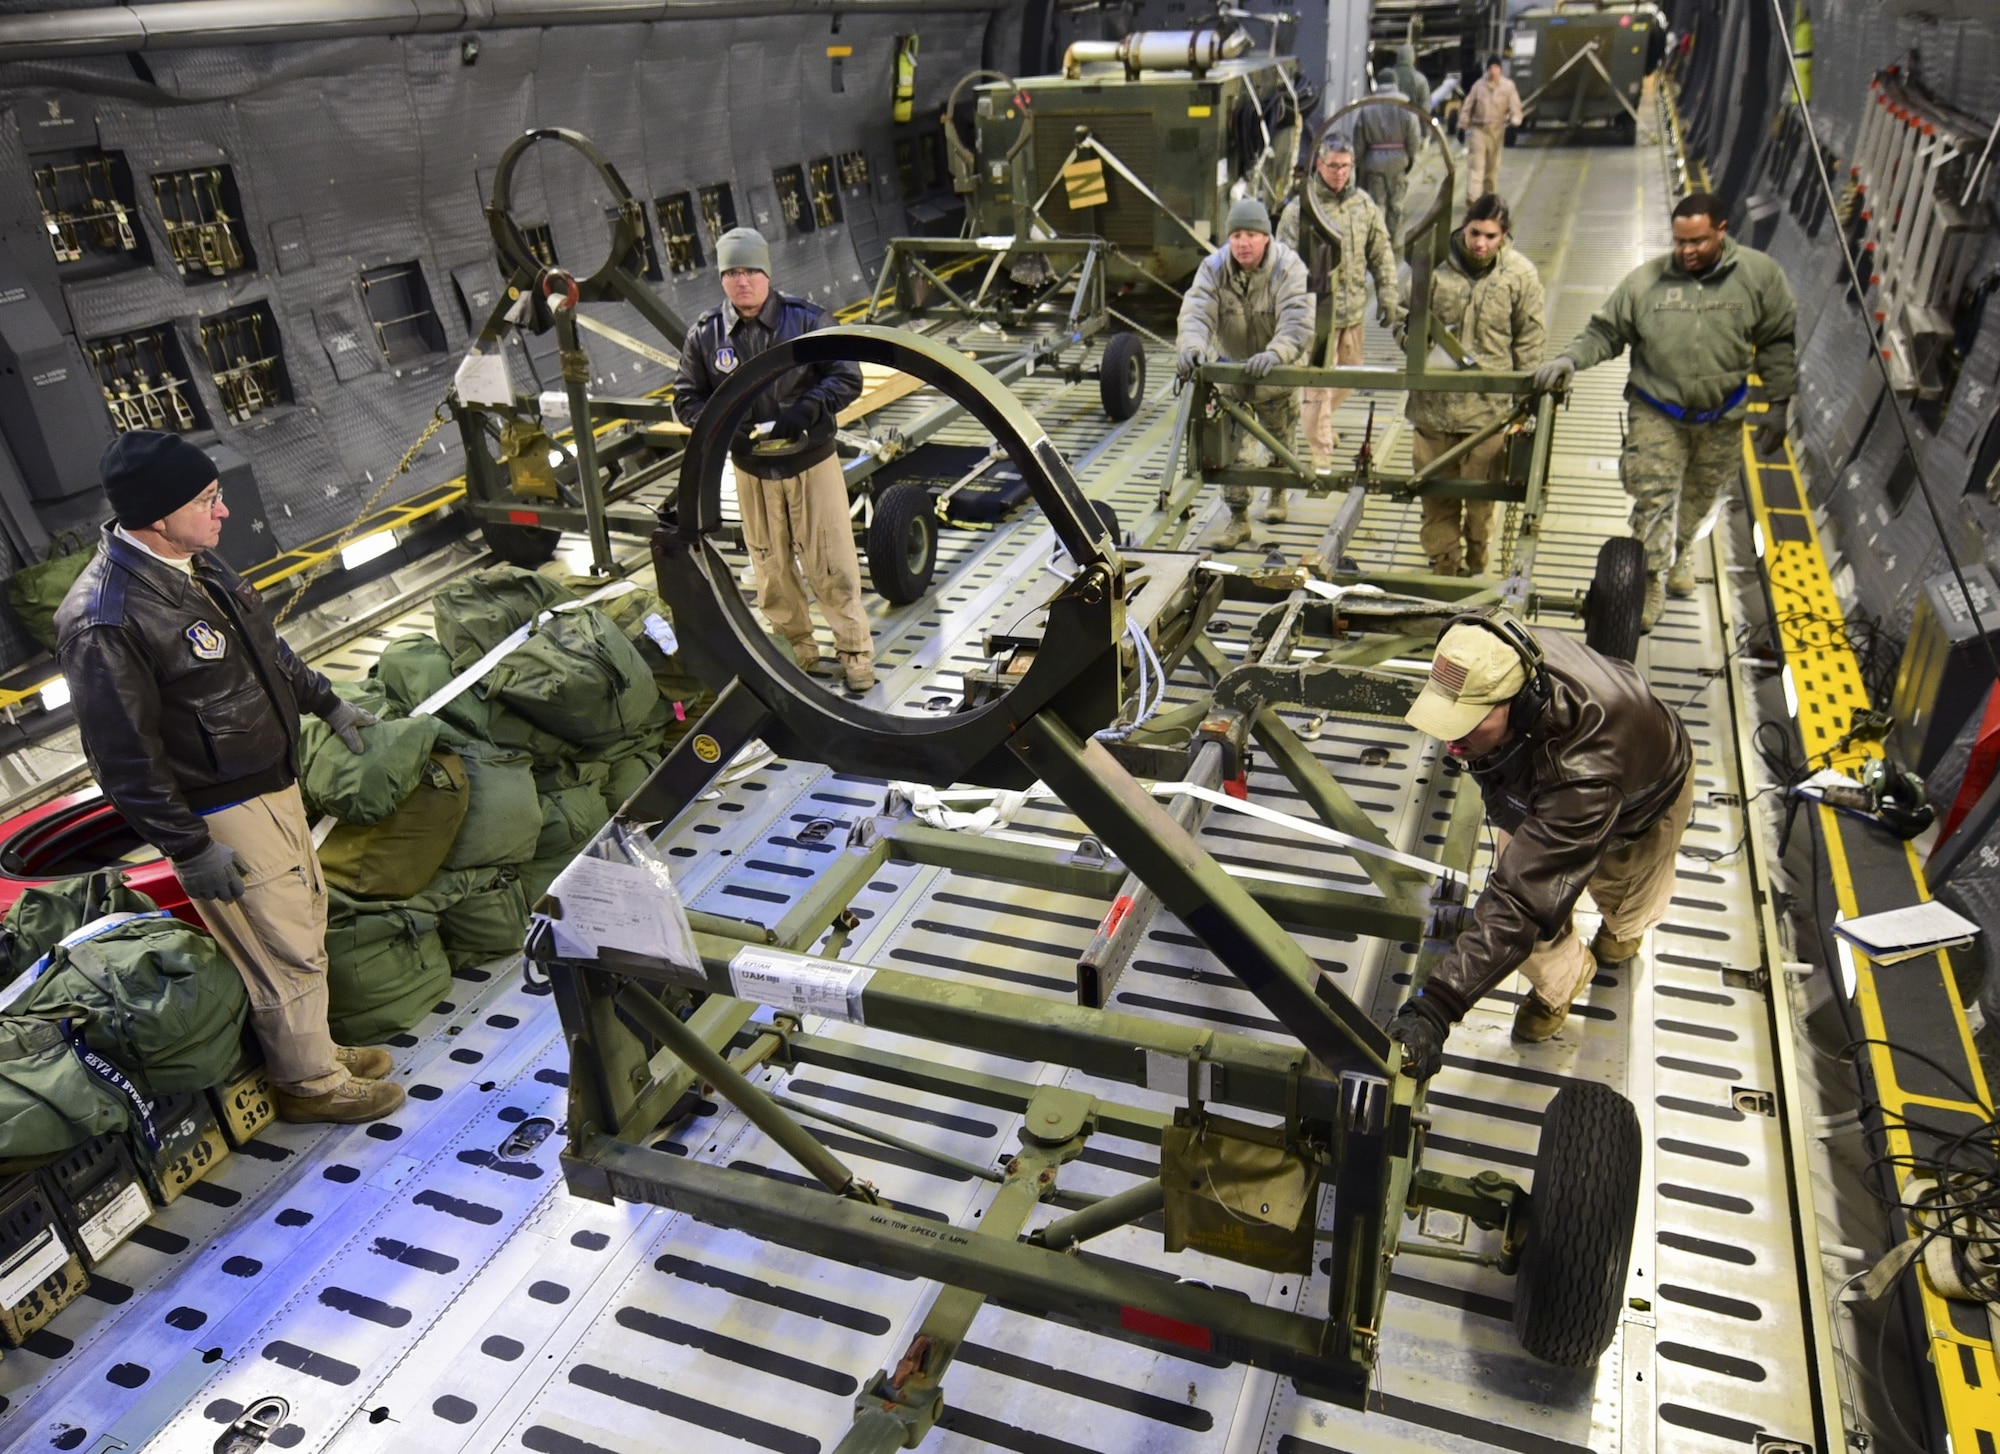 Aircrew members and Airmen from the 28th Logistics Readiness Squadron unload cargo from a C-5M Super Galaxy at Ellsworth Air Force Base, S.D., Feb. 2, 2018. Equipment used in the recent deployment to Andersen AFB, Guam, was flown back to Ellsworth AFB between Jan. 30 and Feb. 6, where it was unloaded by the 28th LRS and sent back to its respective squadrons. (U.S. Air Force photo by Senior Airman Randahl J. Jenson)